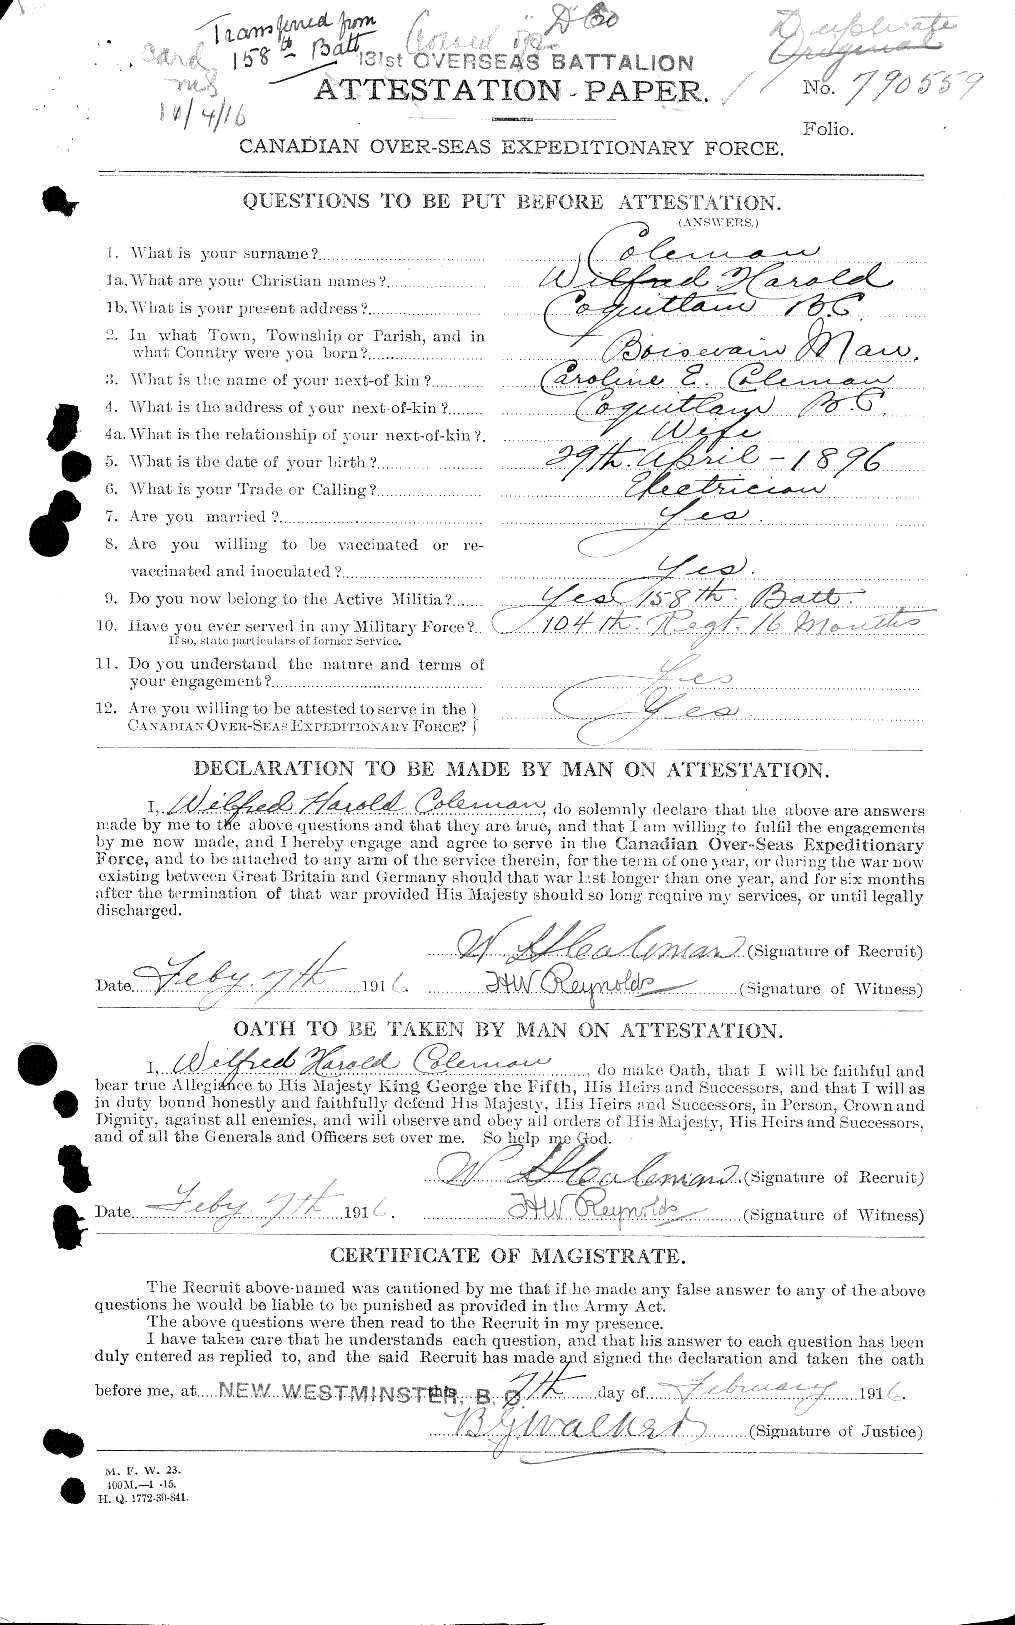 Personnel Records of the First World War - CEF 028292a